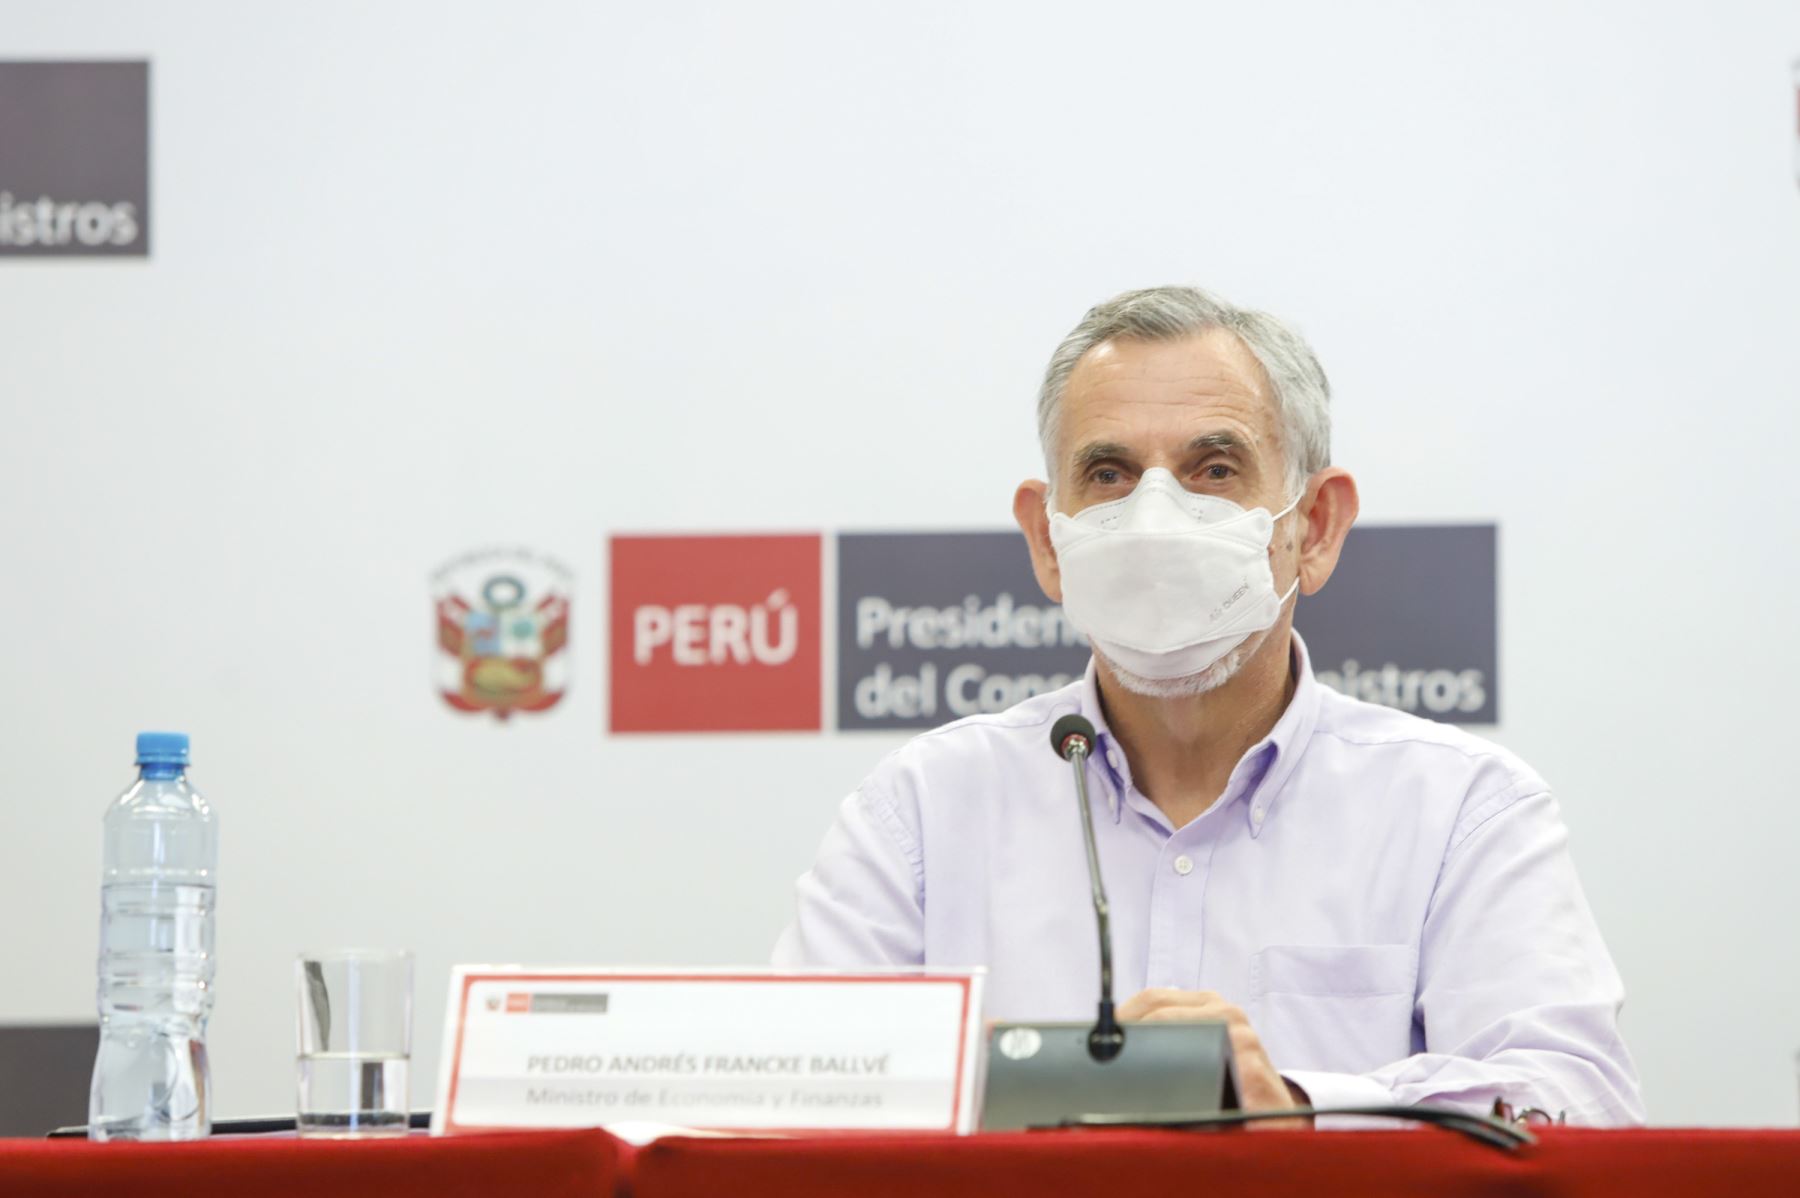 Photo: ANDINA/Presidency of the Council of Ministers of Peru